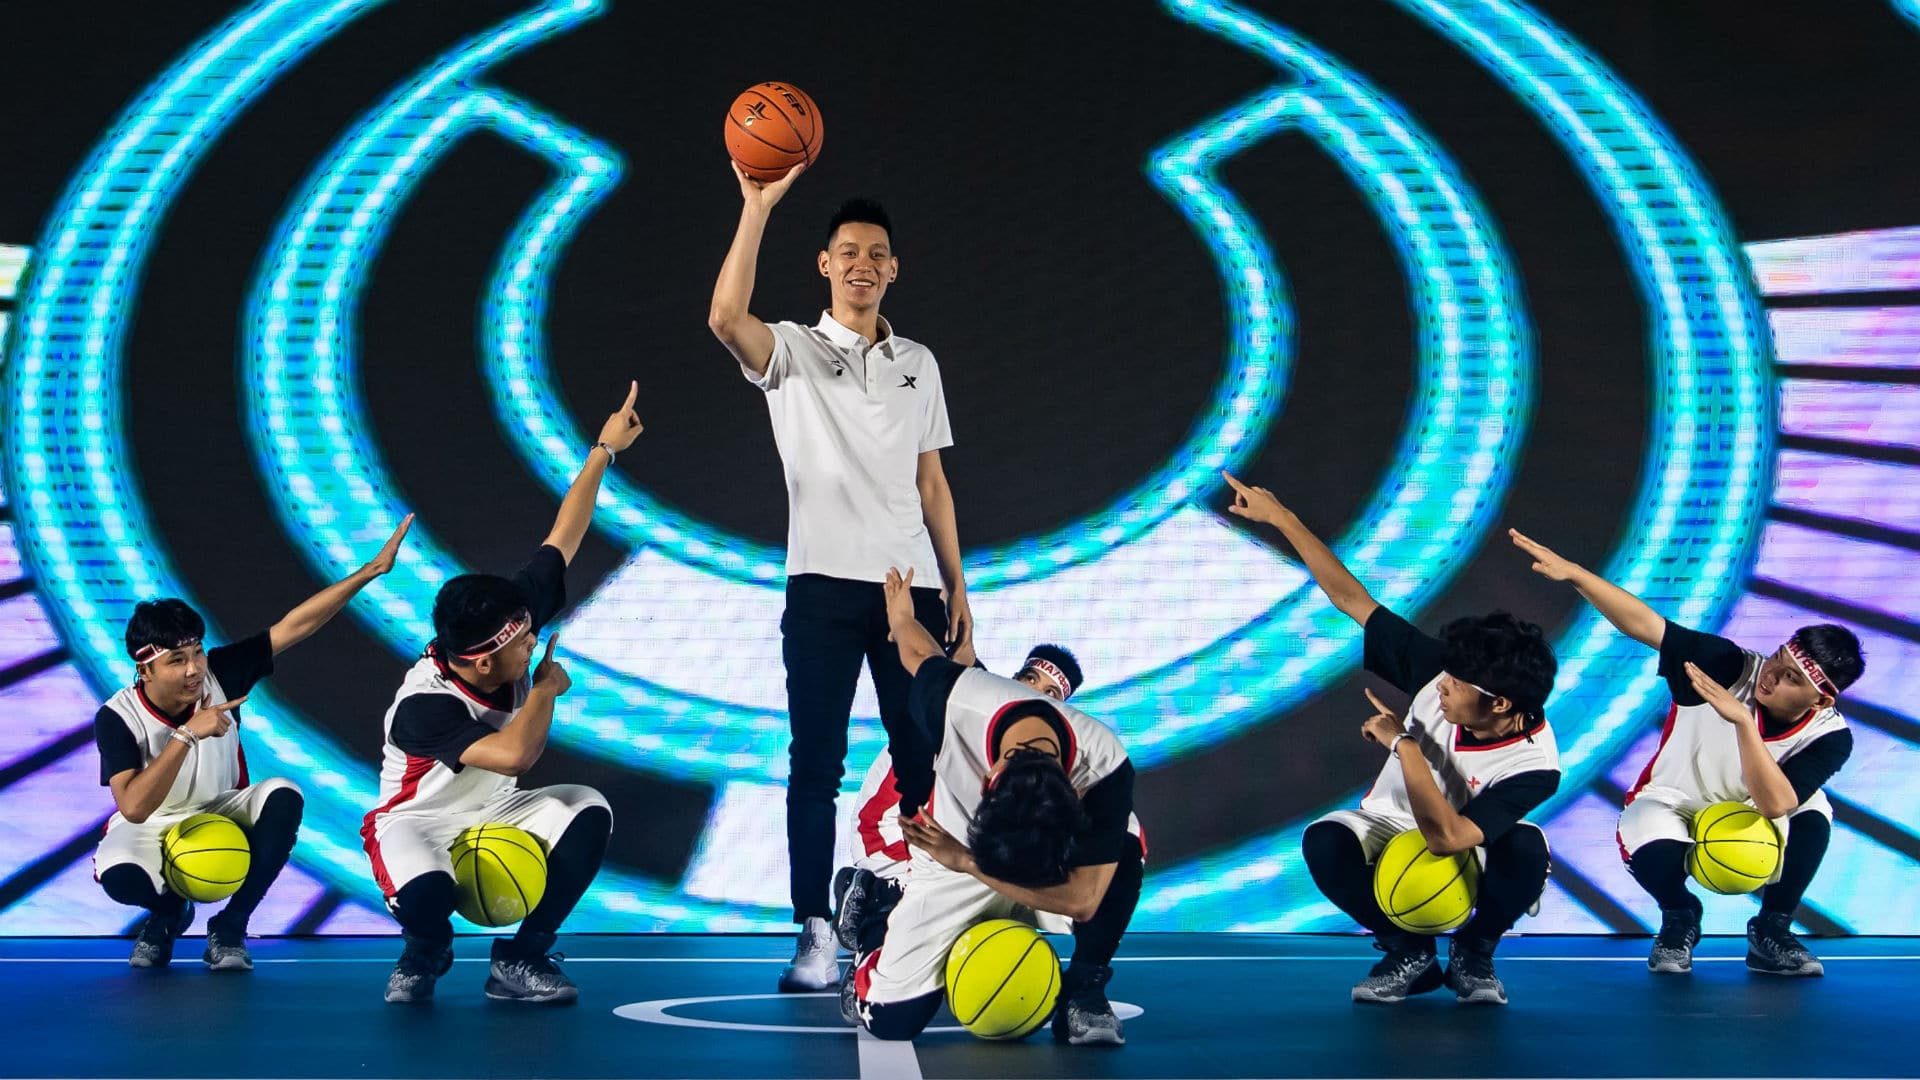 Jeremy Lin signs with Beijing Ducks